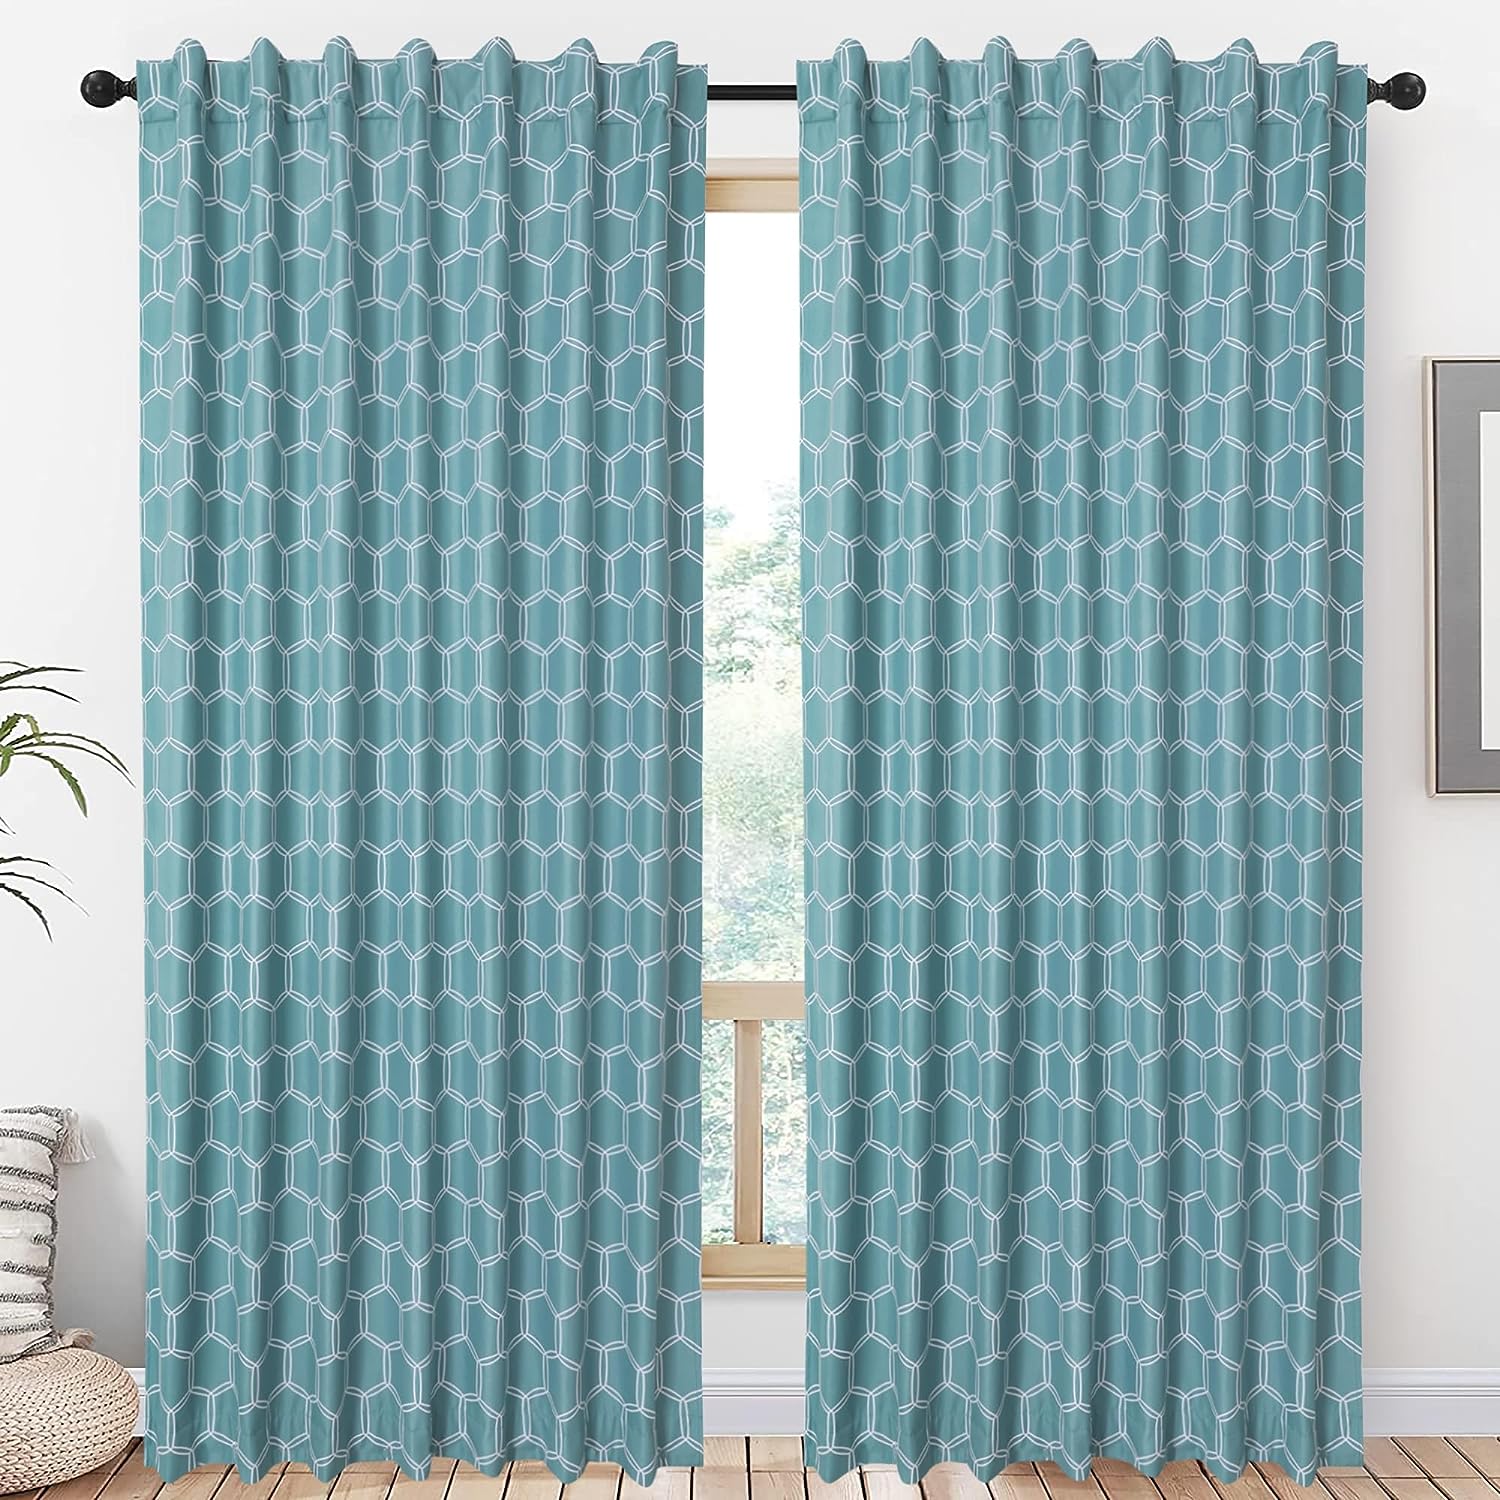 Aiyufeng Printed 100% Blackout Window Curtain Panels, [...]